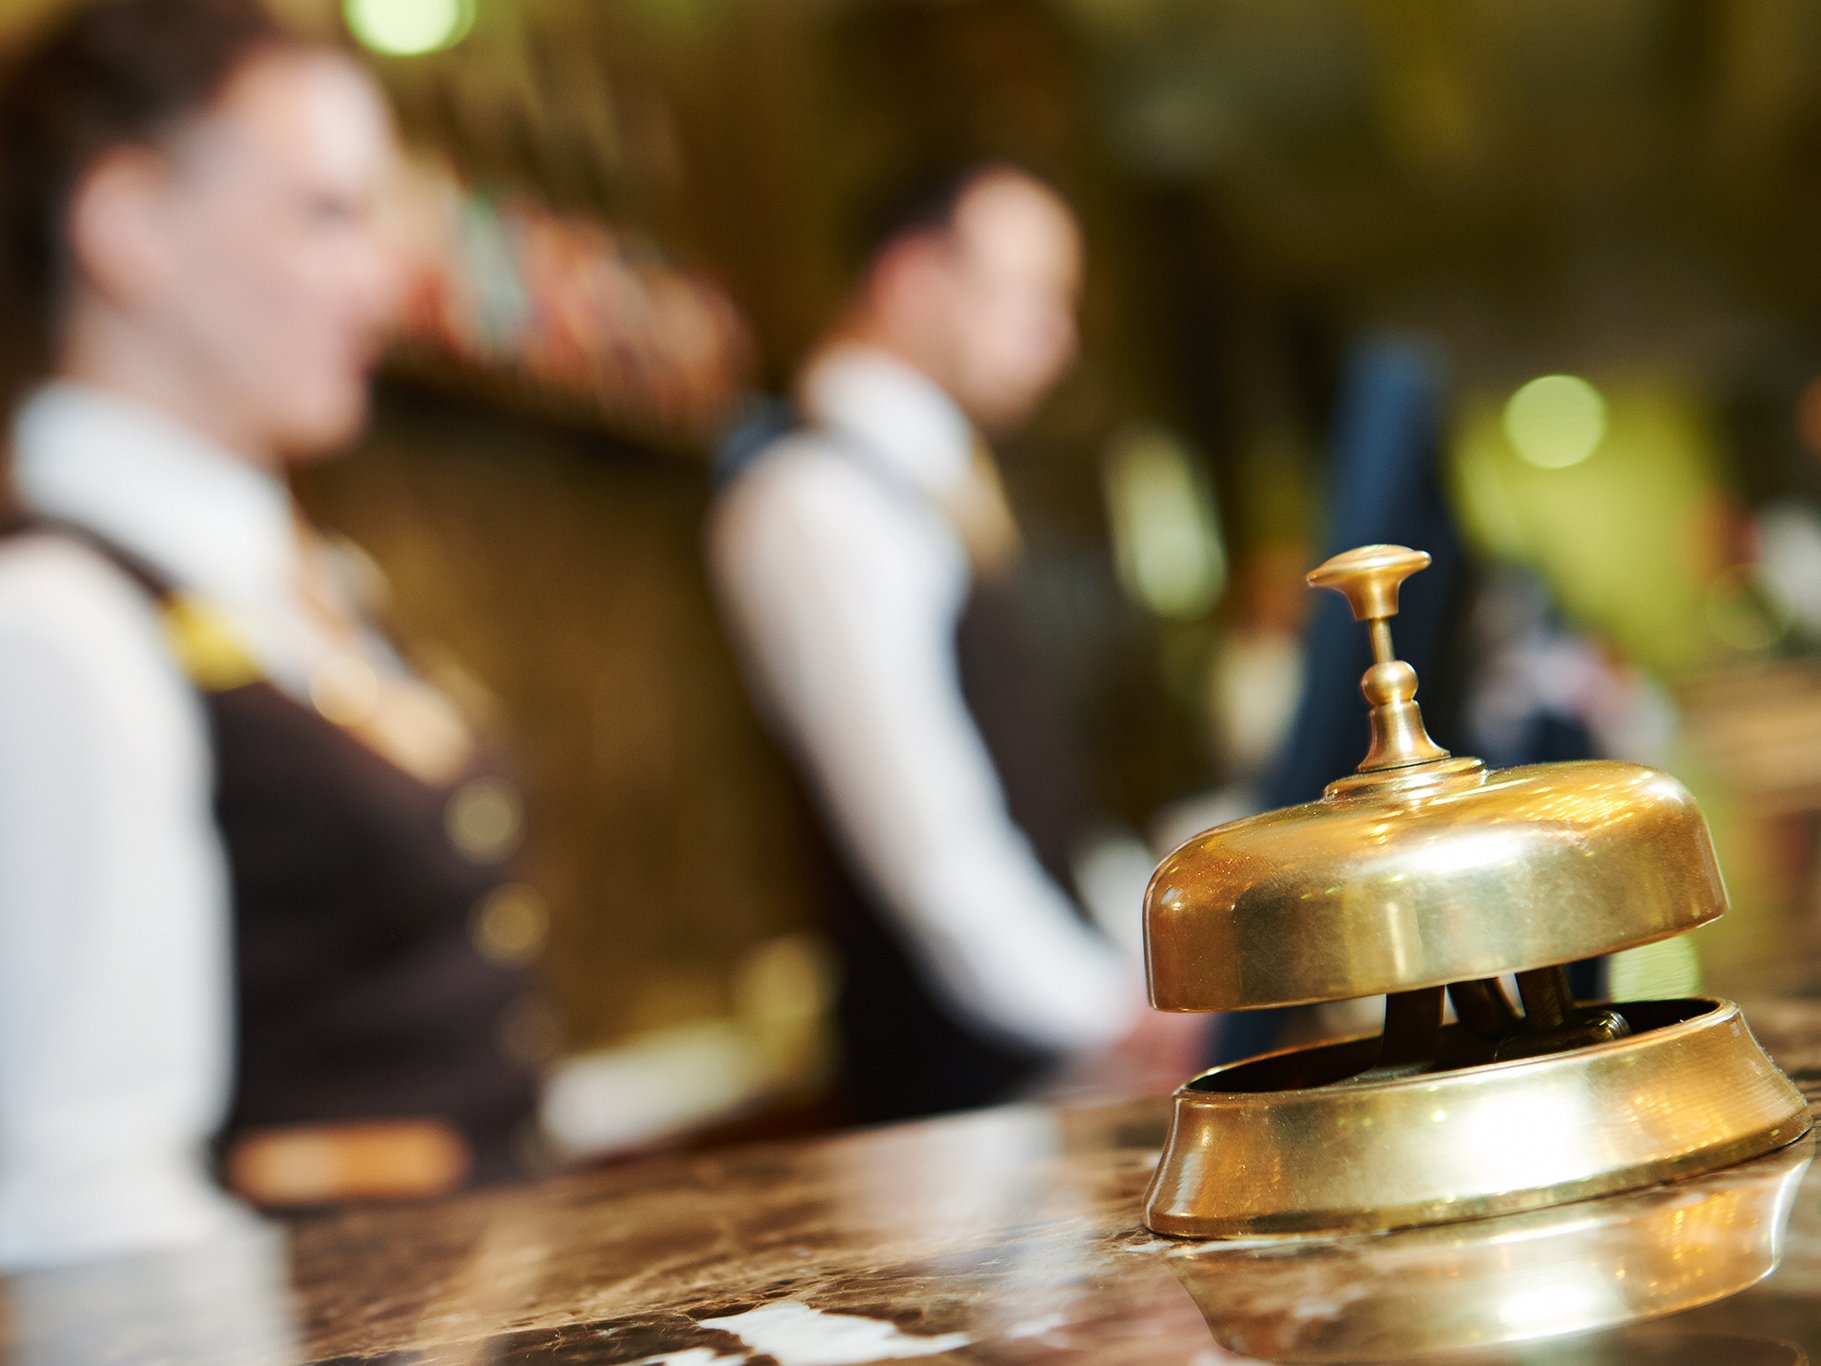 Hotels across Europe had an overall occupancy rate fall.